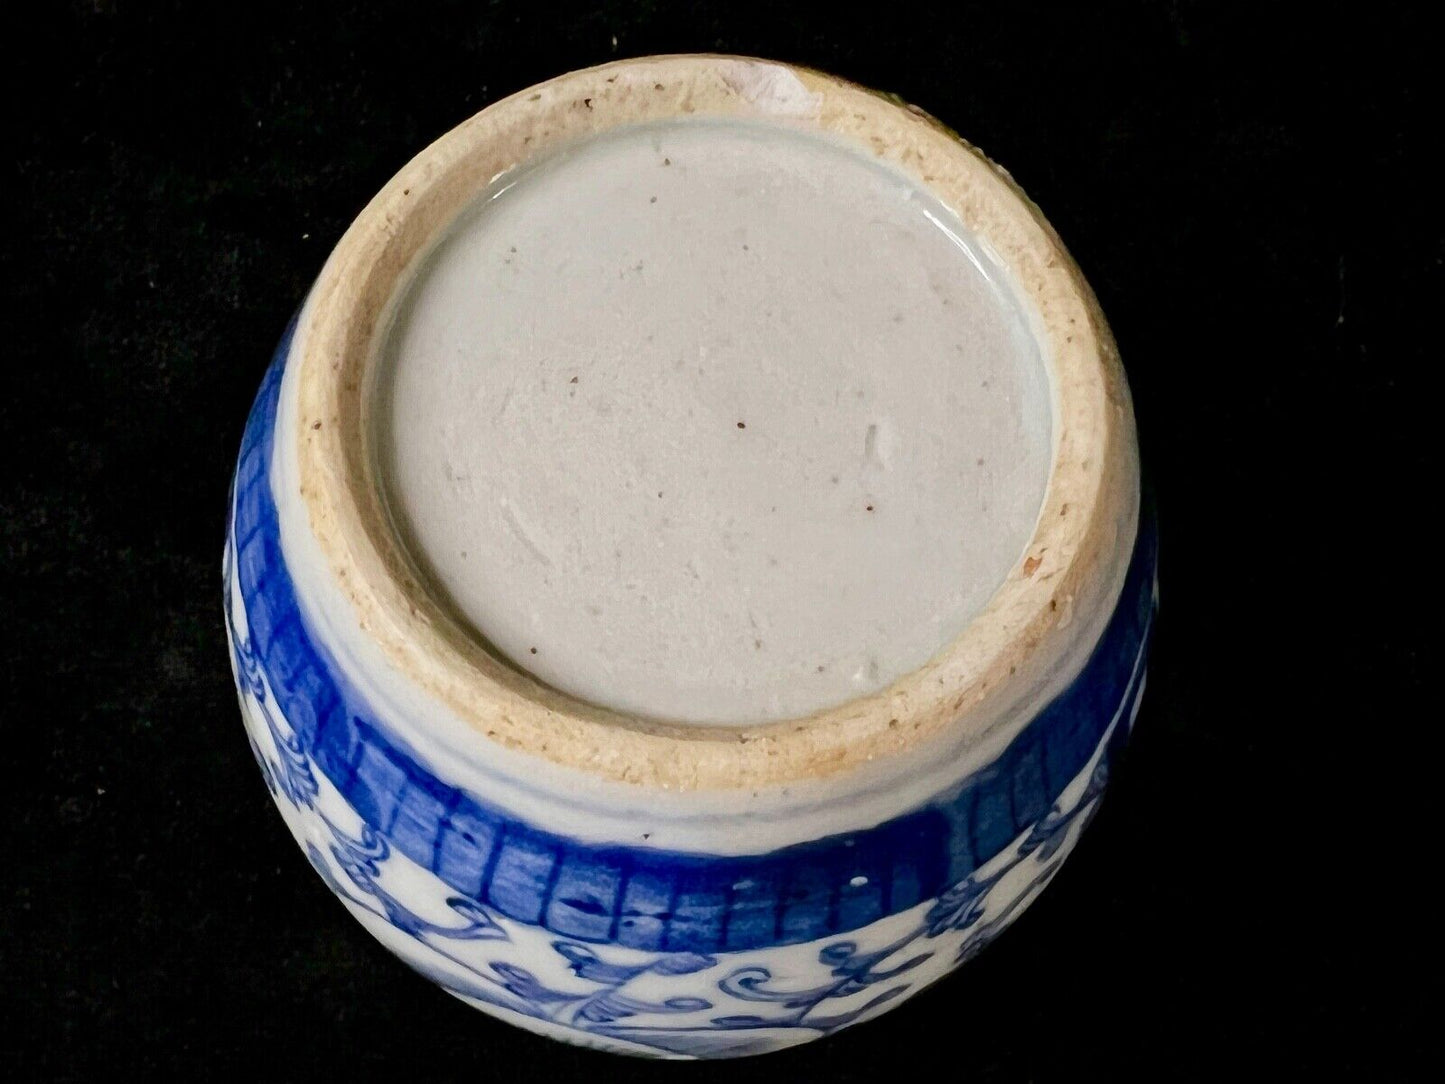 Antique Chinese Qing 19Th Century Blue & White Jar Double Happiness 3.25"